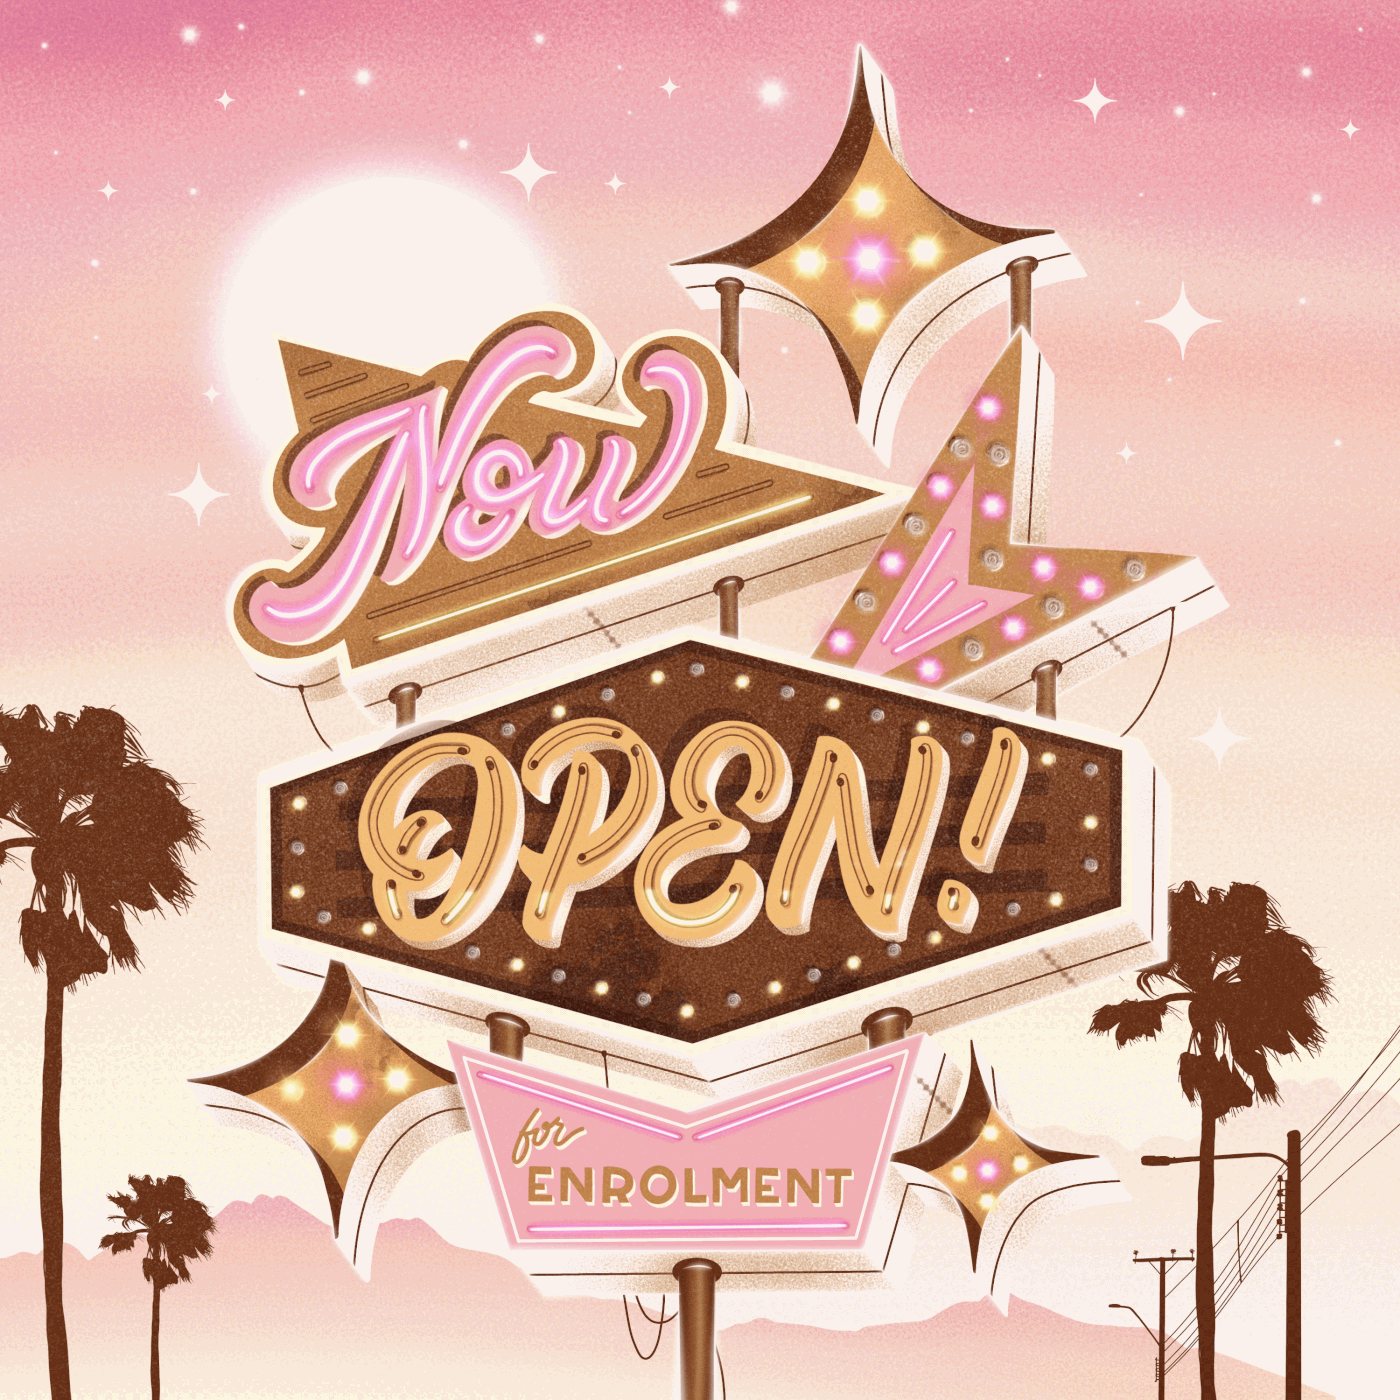 "Now open" Retro Sign lettering in Procreate